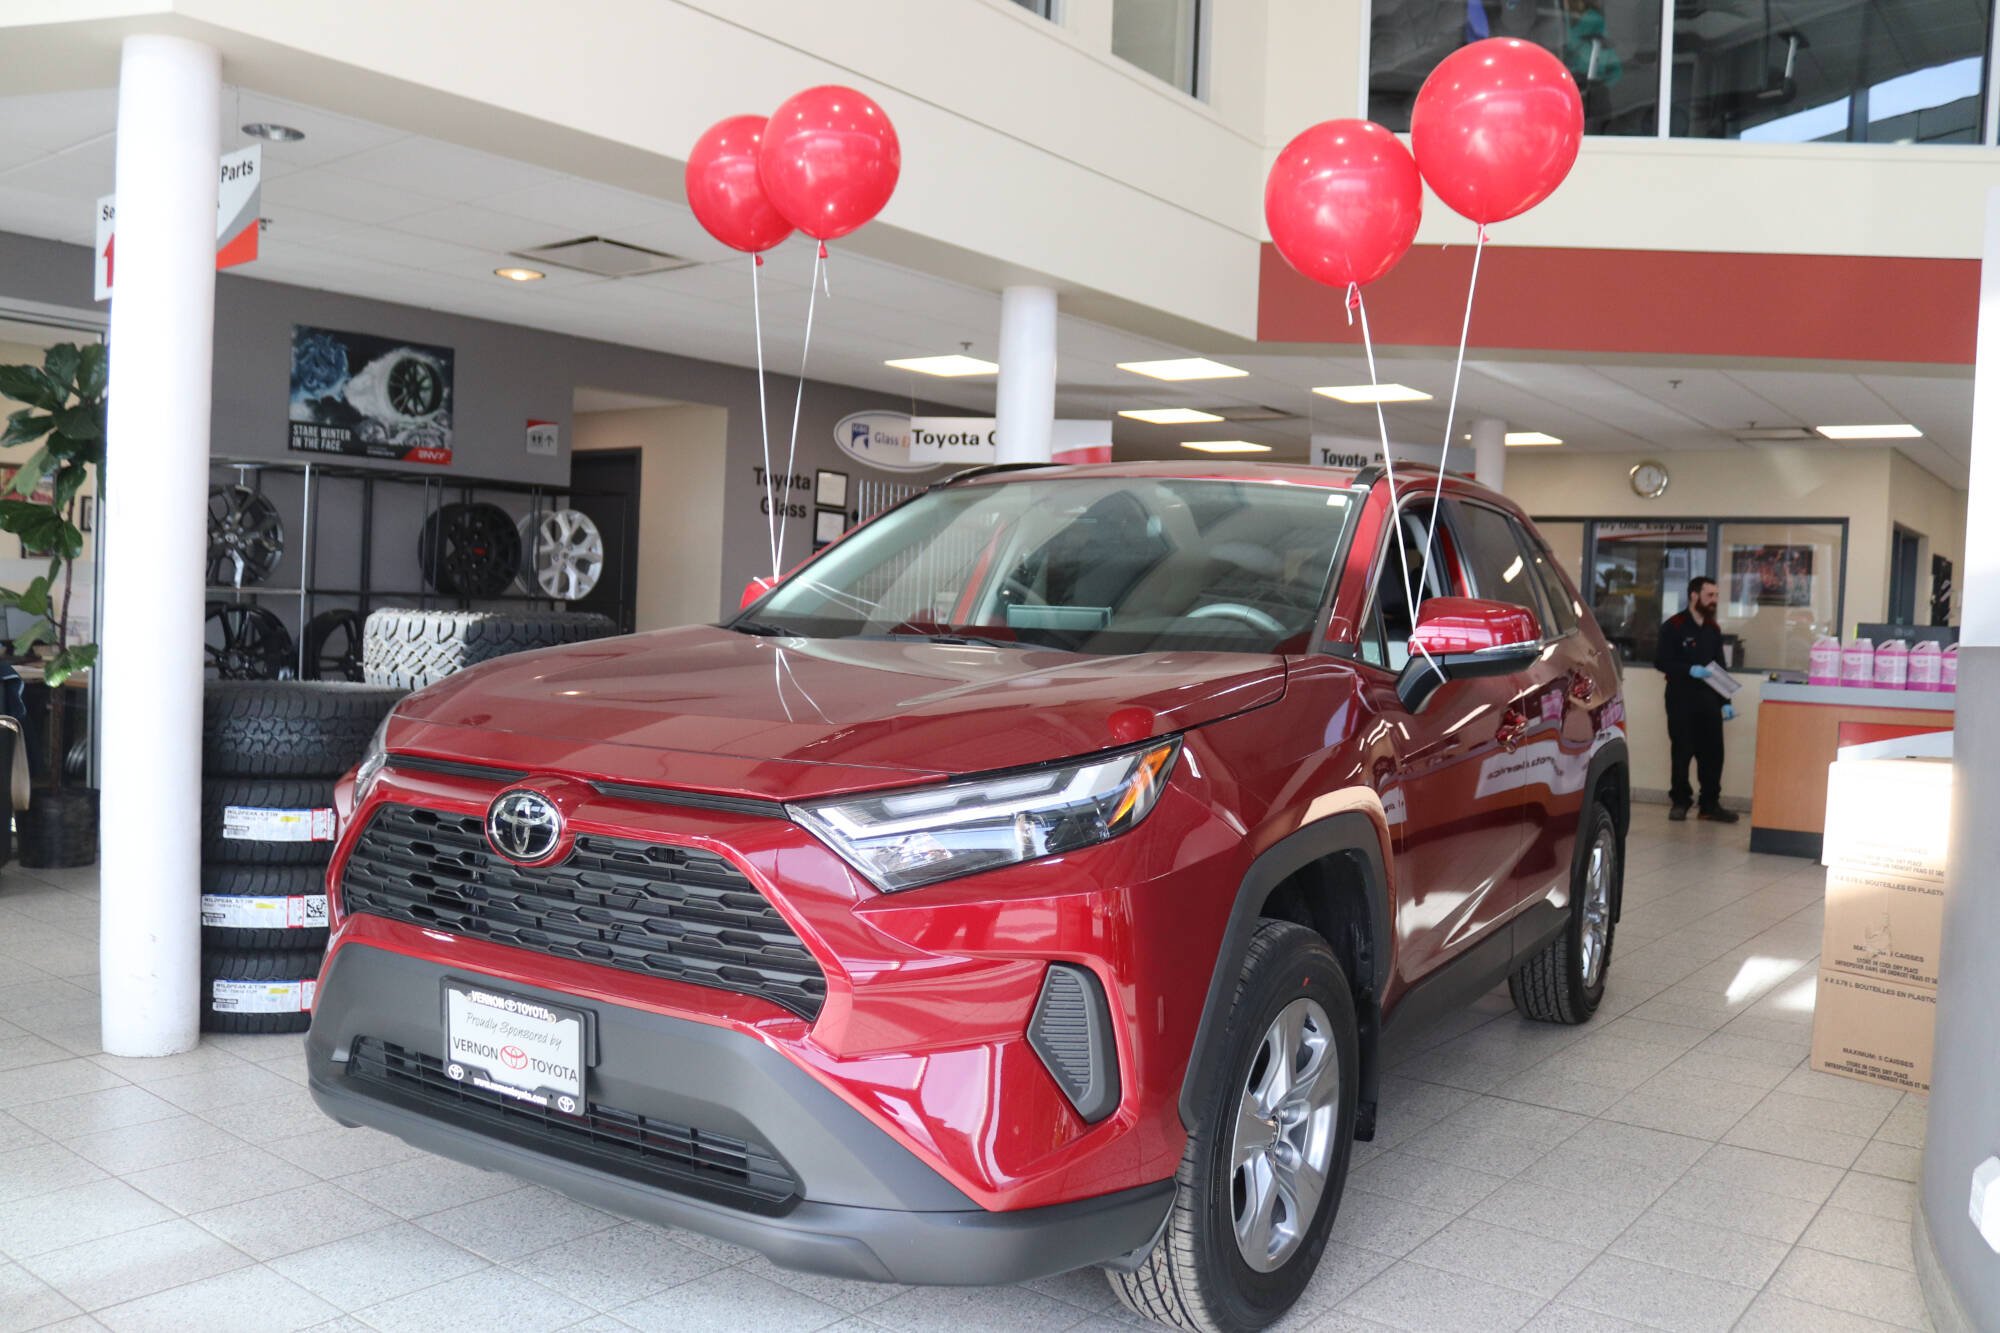 Reno and Kathy Ouano won a free 2023 Toyota Rav4 by having the winning ticket in the Knights of Columbuss annual charity appeal draw. (Brendan Shykora - Morning Star)